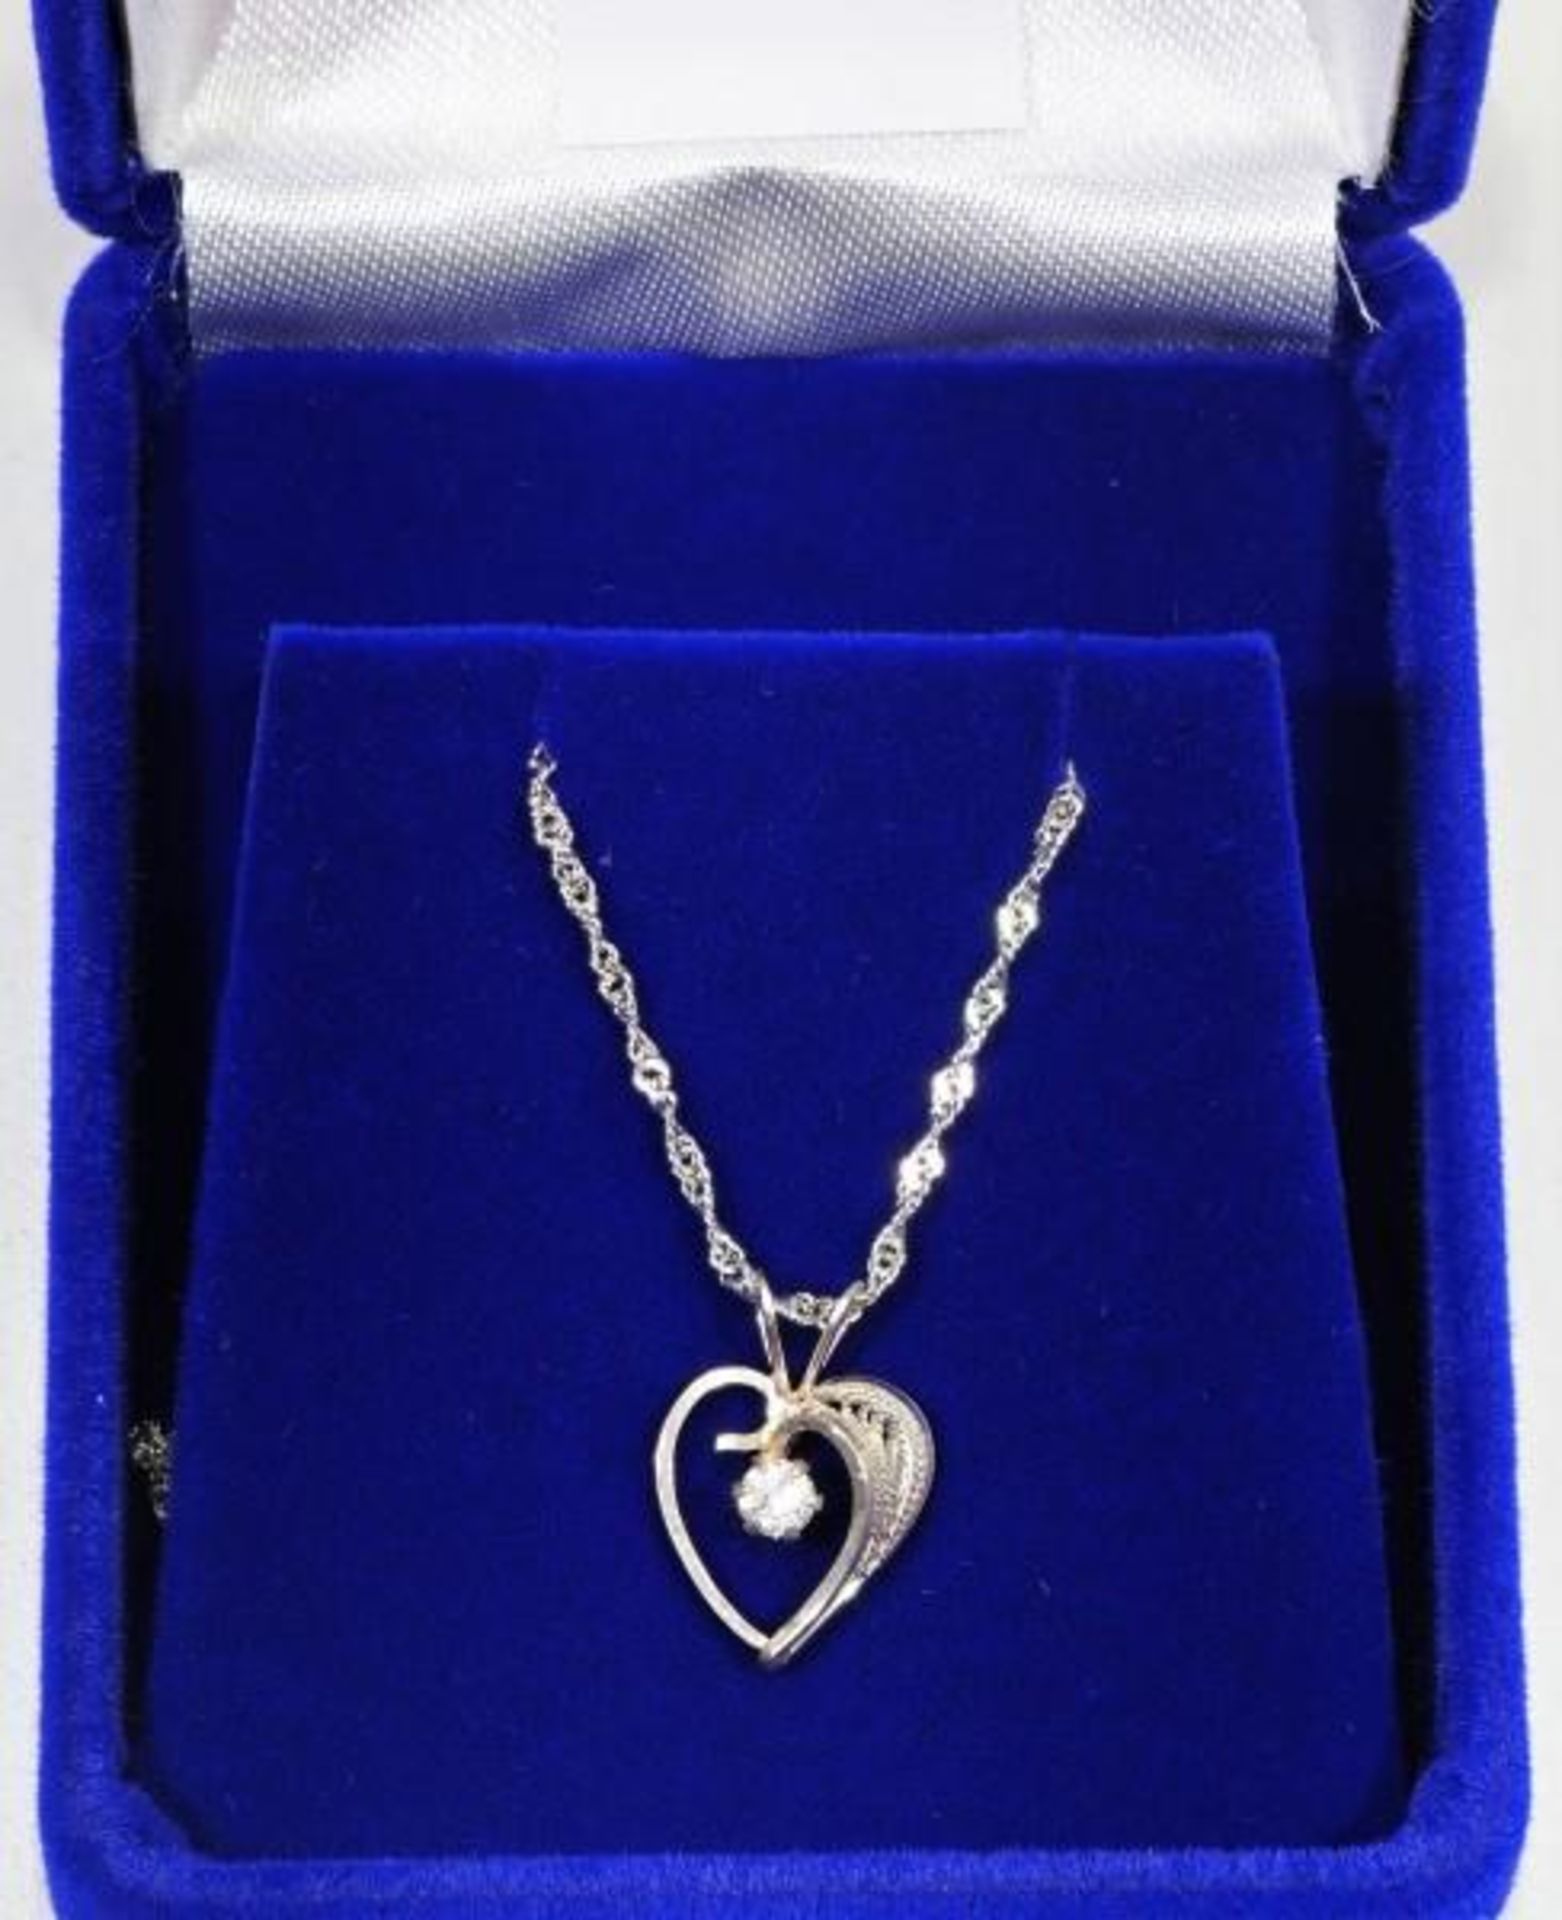 S. Silver Heart Shaped CZ Pendant with Chain. Retail $120 (MS07 - 5) - Image 2 of 2